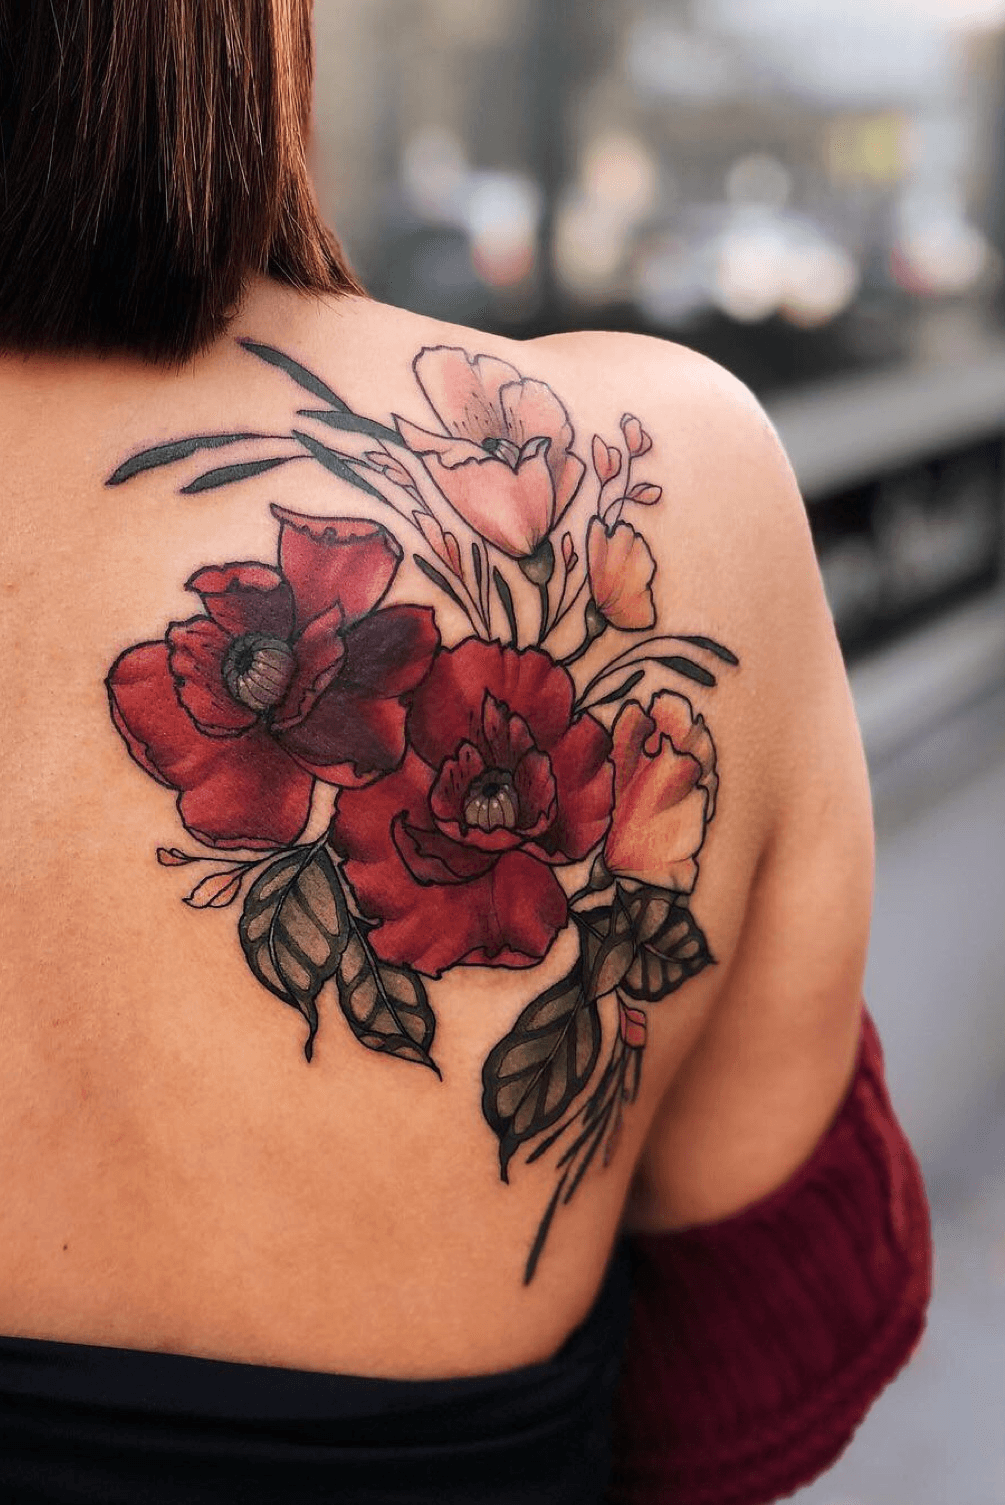 50 back Shoulder Tattoo Ideas For Woman